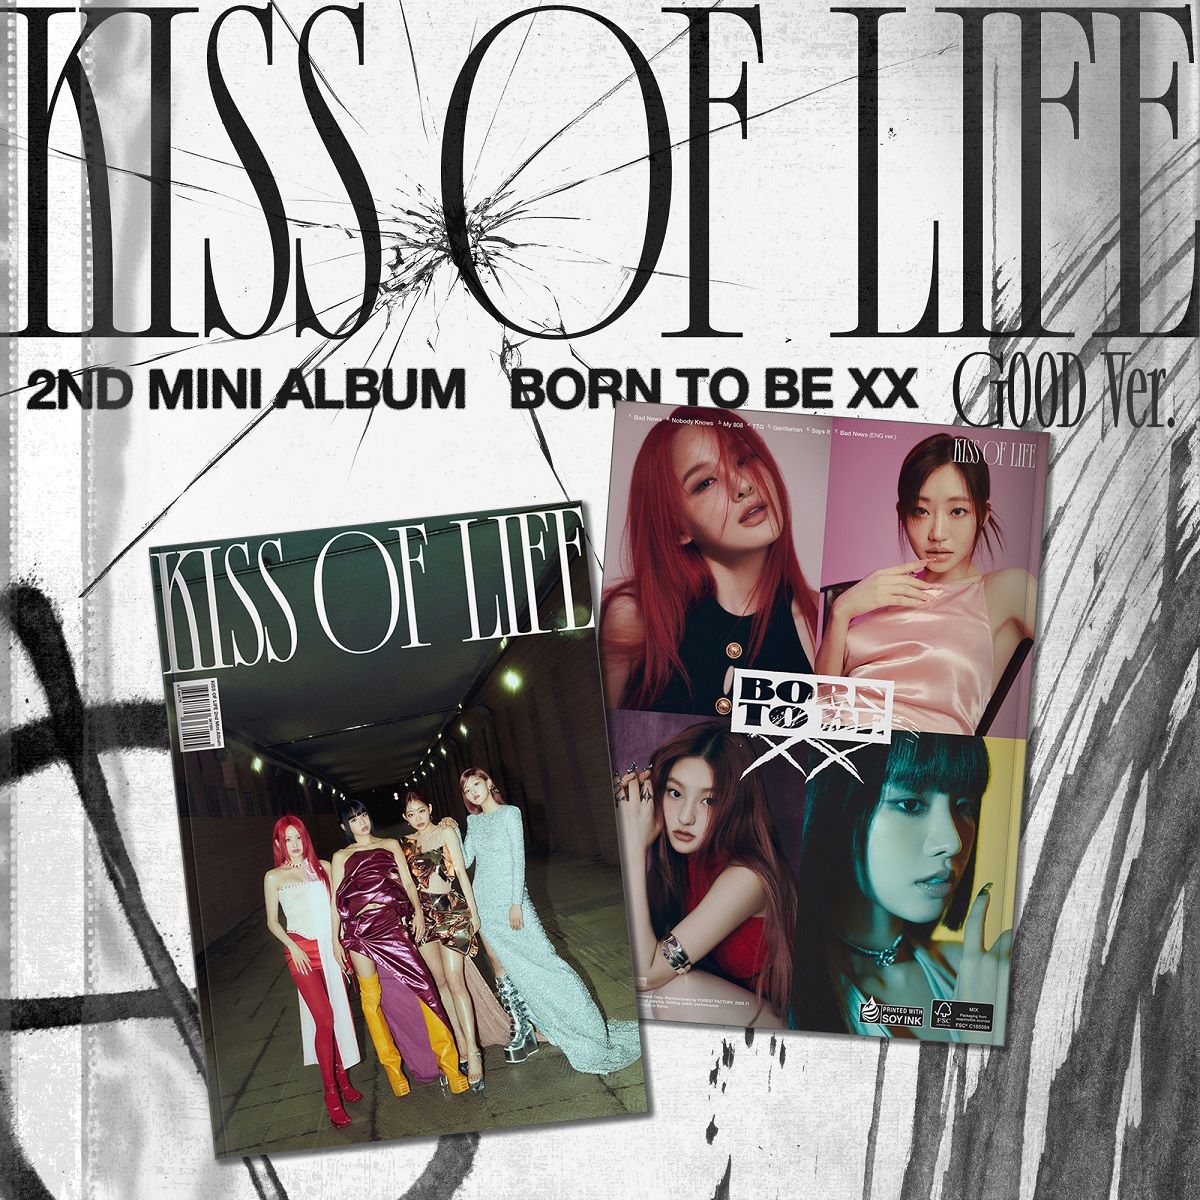 KISS OF LIFE 2ND MINI ALBUM 'BORN TO BE XX' GOOD VERSION COVER